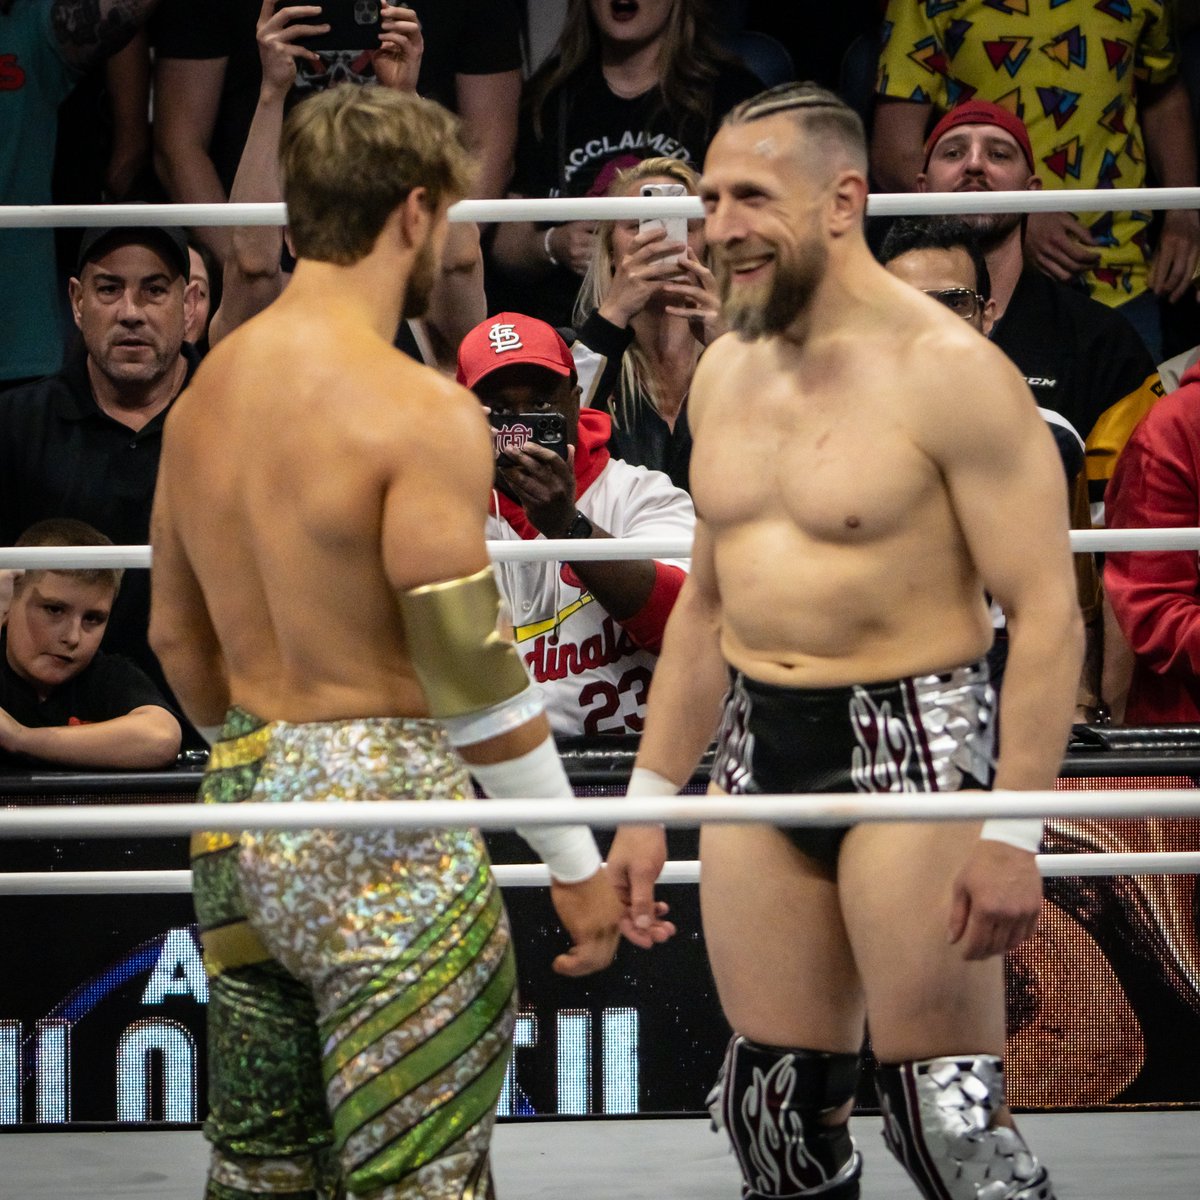 Imagine being as happy as Bryan Danielson at that moment. @WillOspreay vs. @BryanDanielson #AEWDynasty